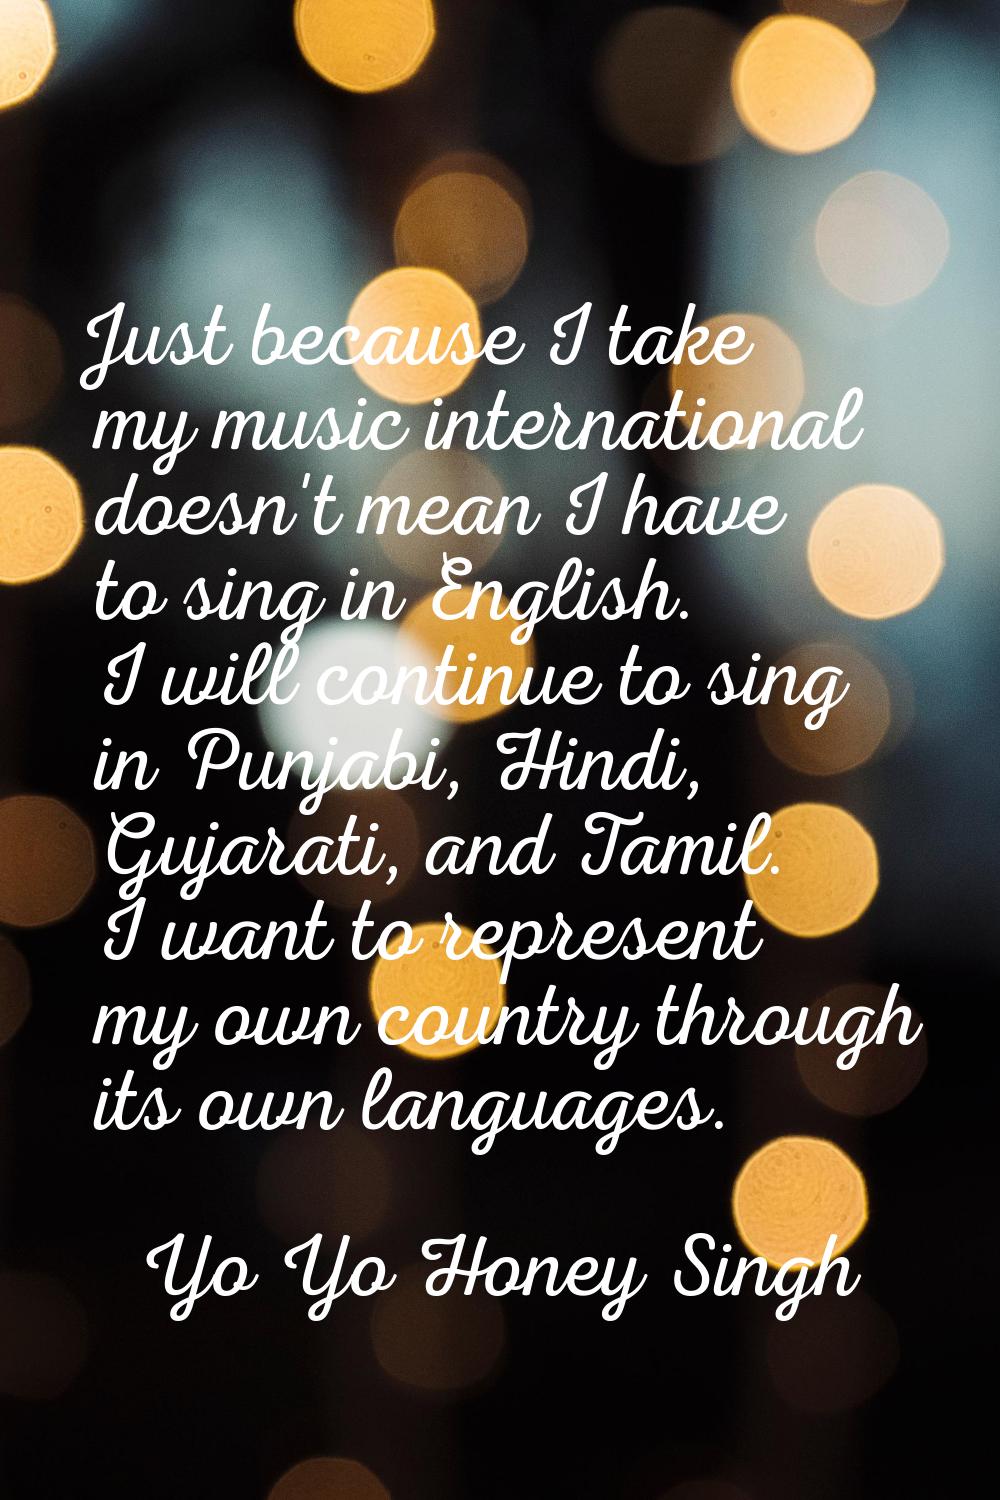 Just because I take my music international doesn't mean I have to sing in English. I will continue 